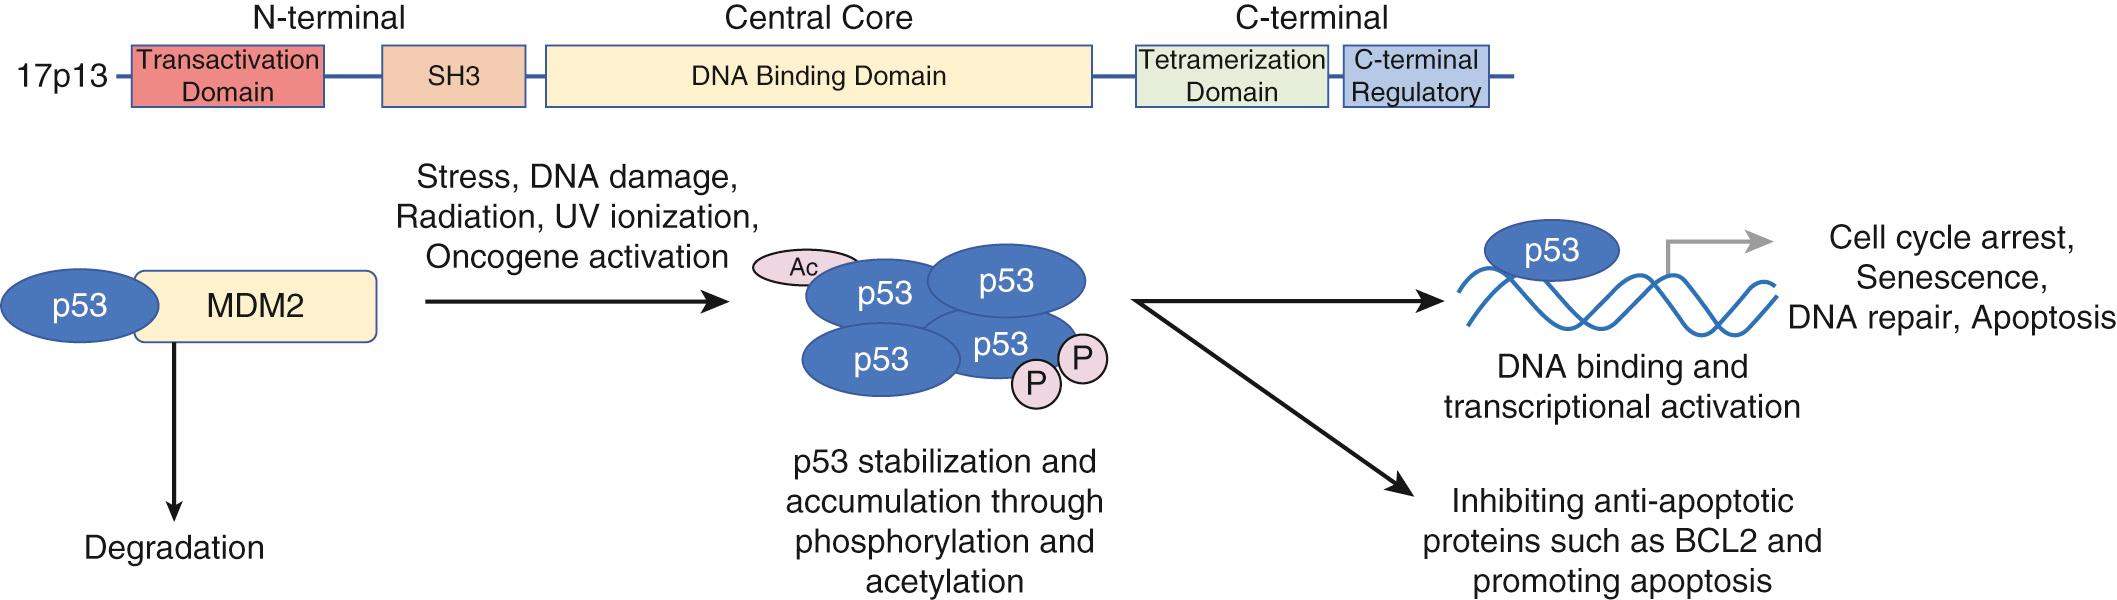 Fig. 73.2, TP53 functional domains and regulation.